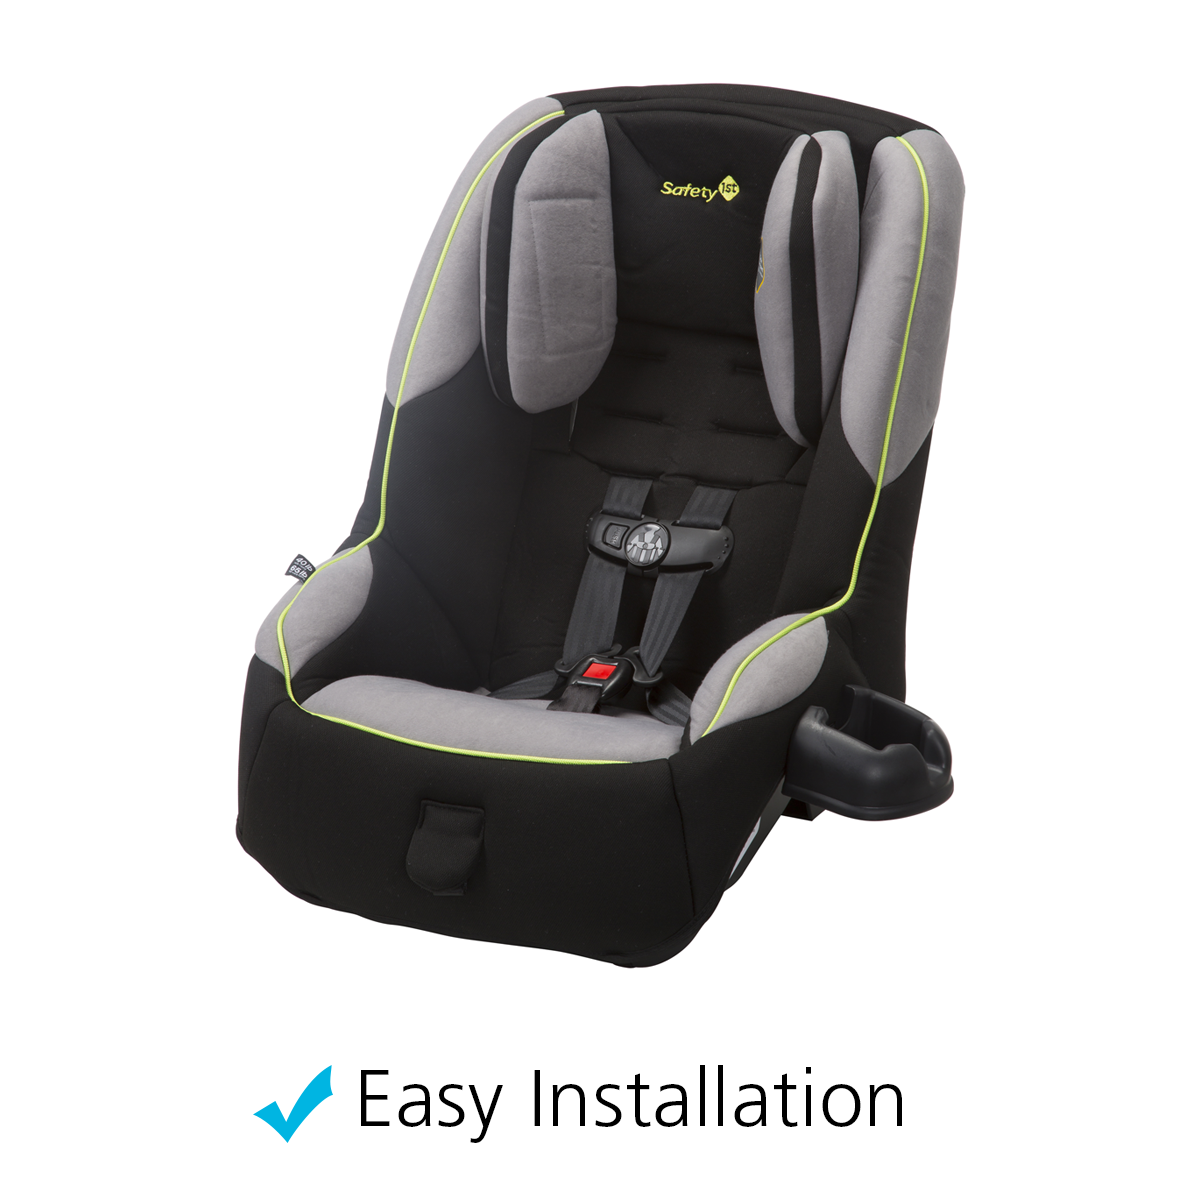 Safety 1st Guide 65 Sport Convertible Car Seat - image 5 of 14